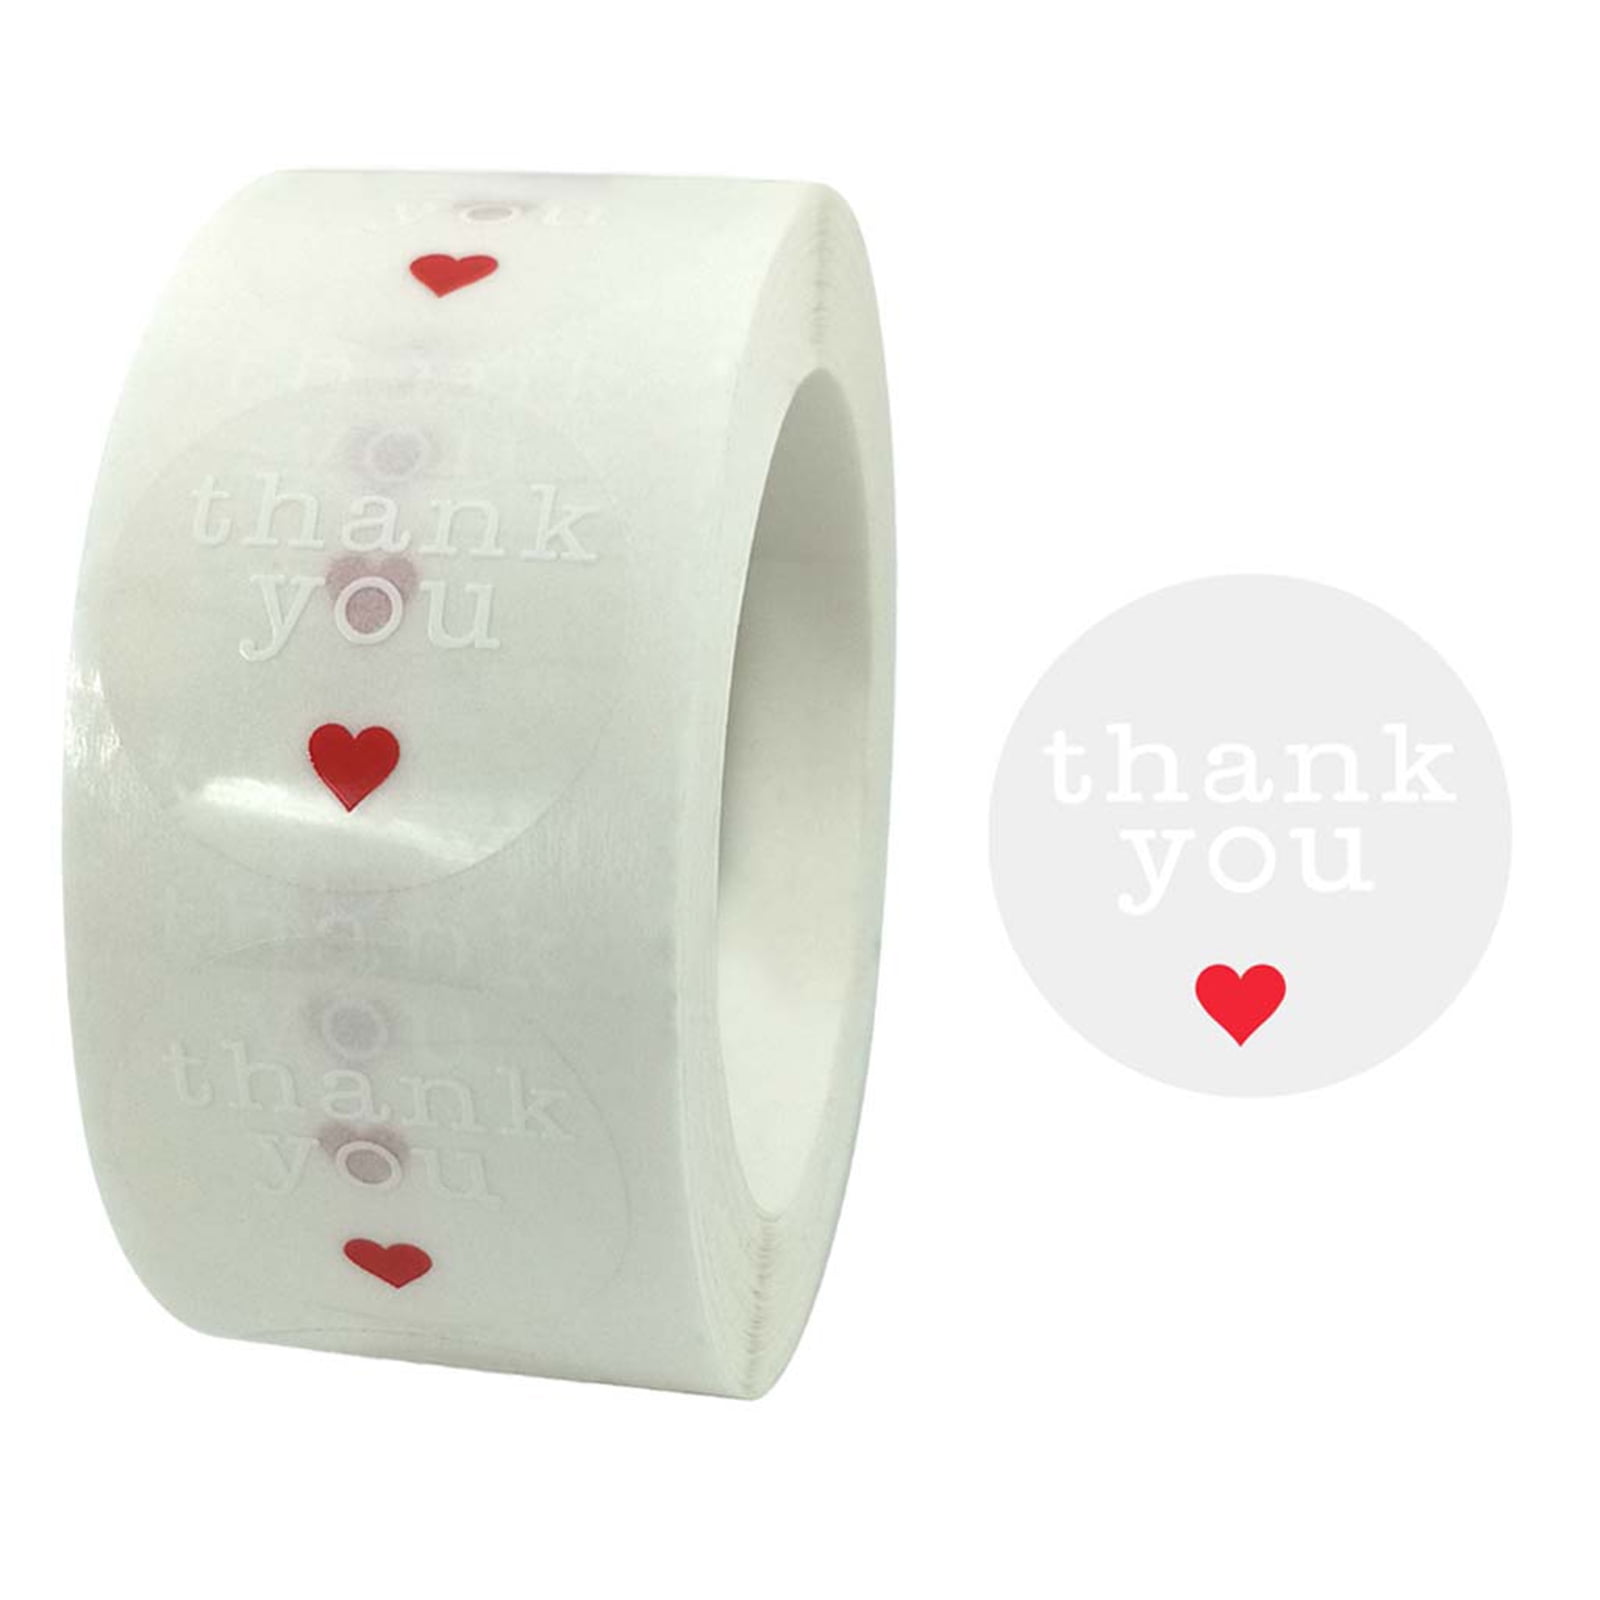 500Pcs 1'' Thank You Heart Stickers Scrapbooking Wedding Party Gift Seal Labels